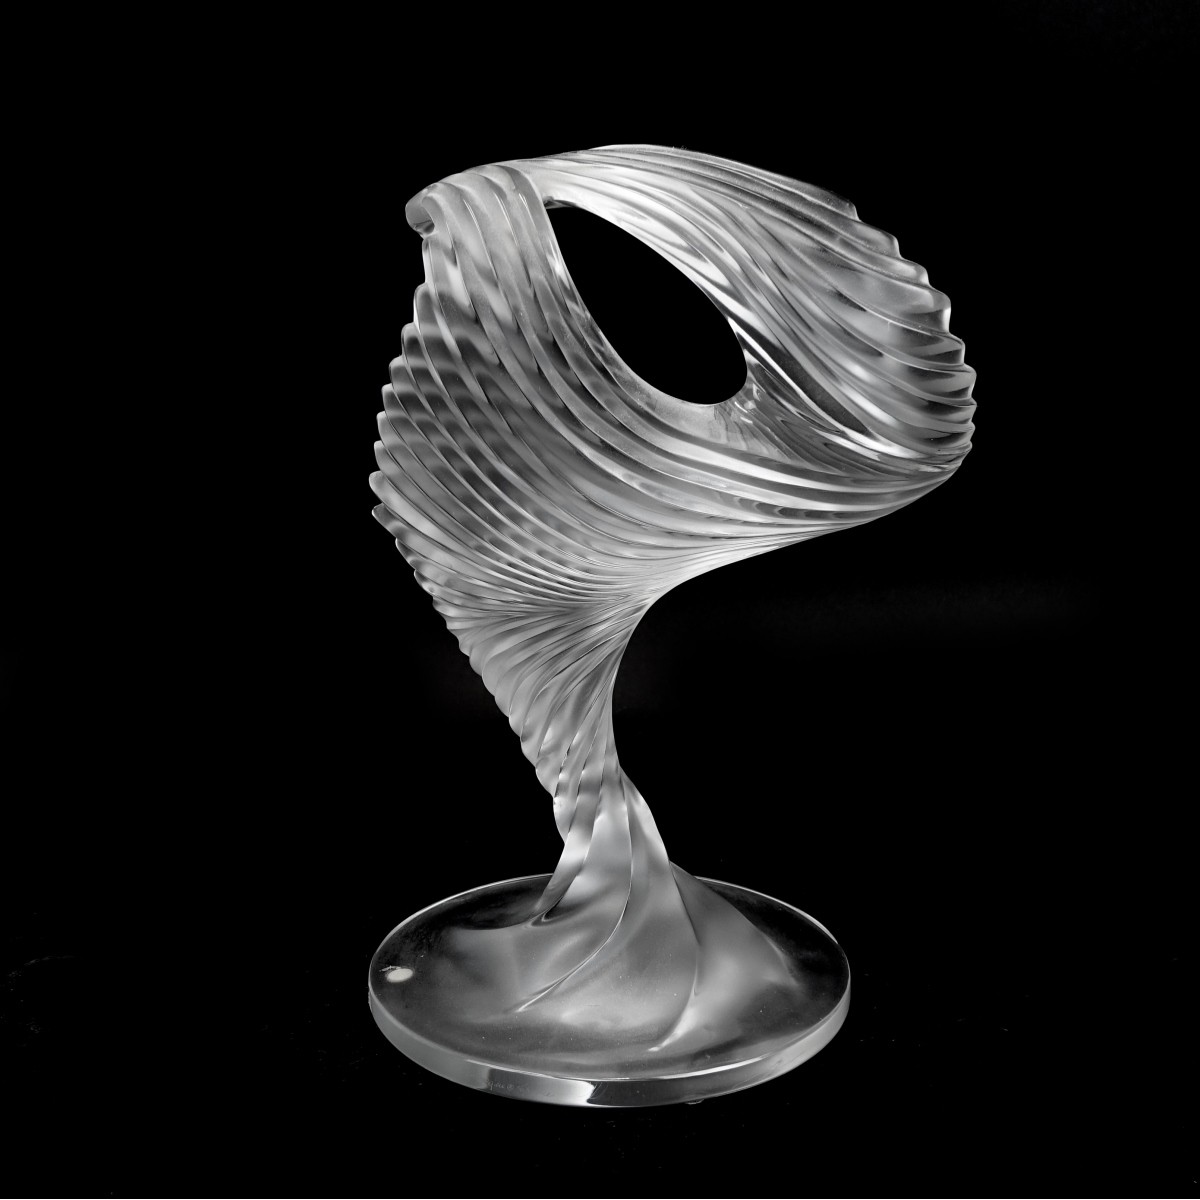 Lalique "Trophee" Frosted Crystal Sculpture